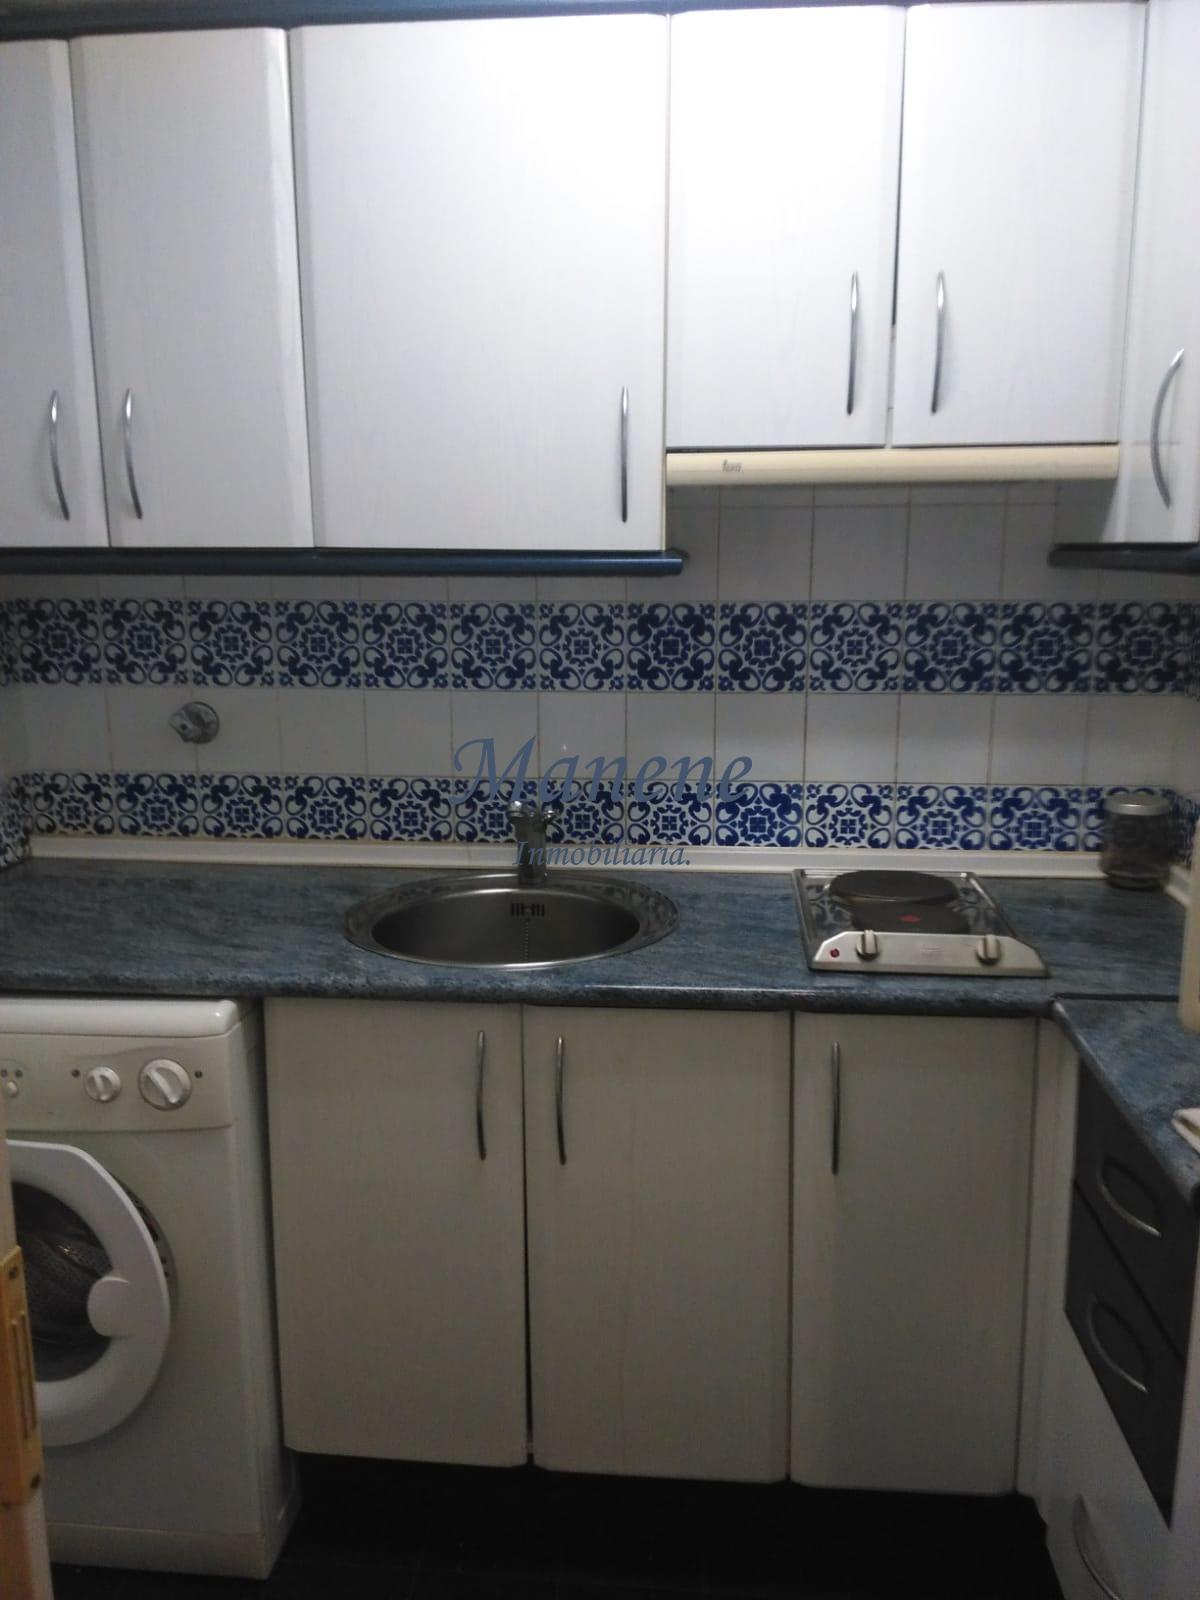 For rent of apartment in Bilbao